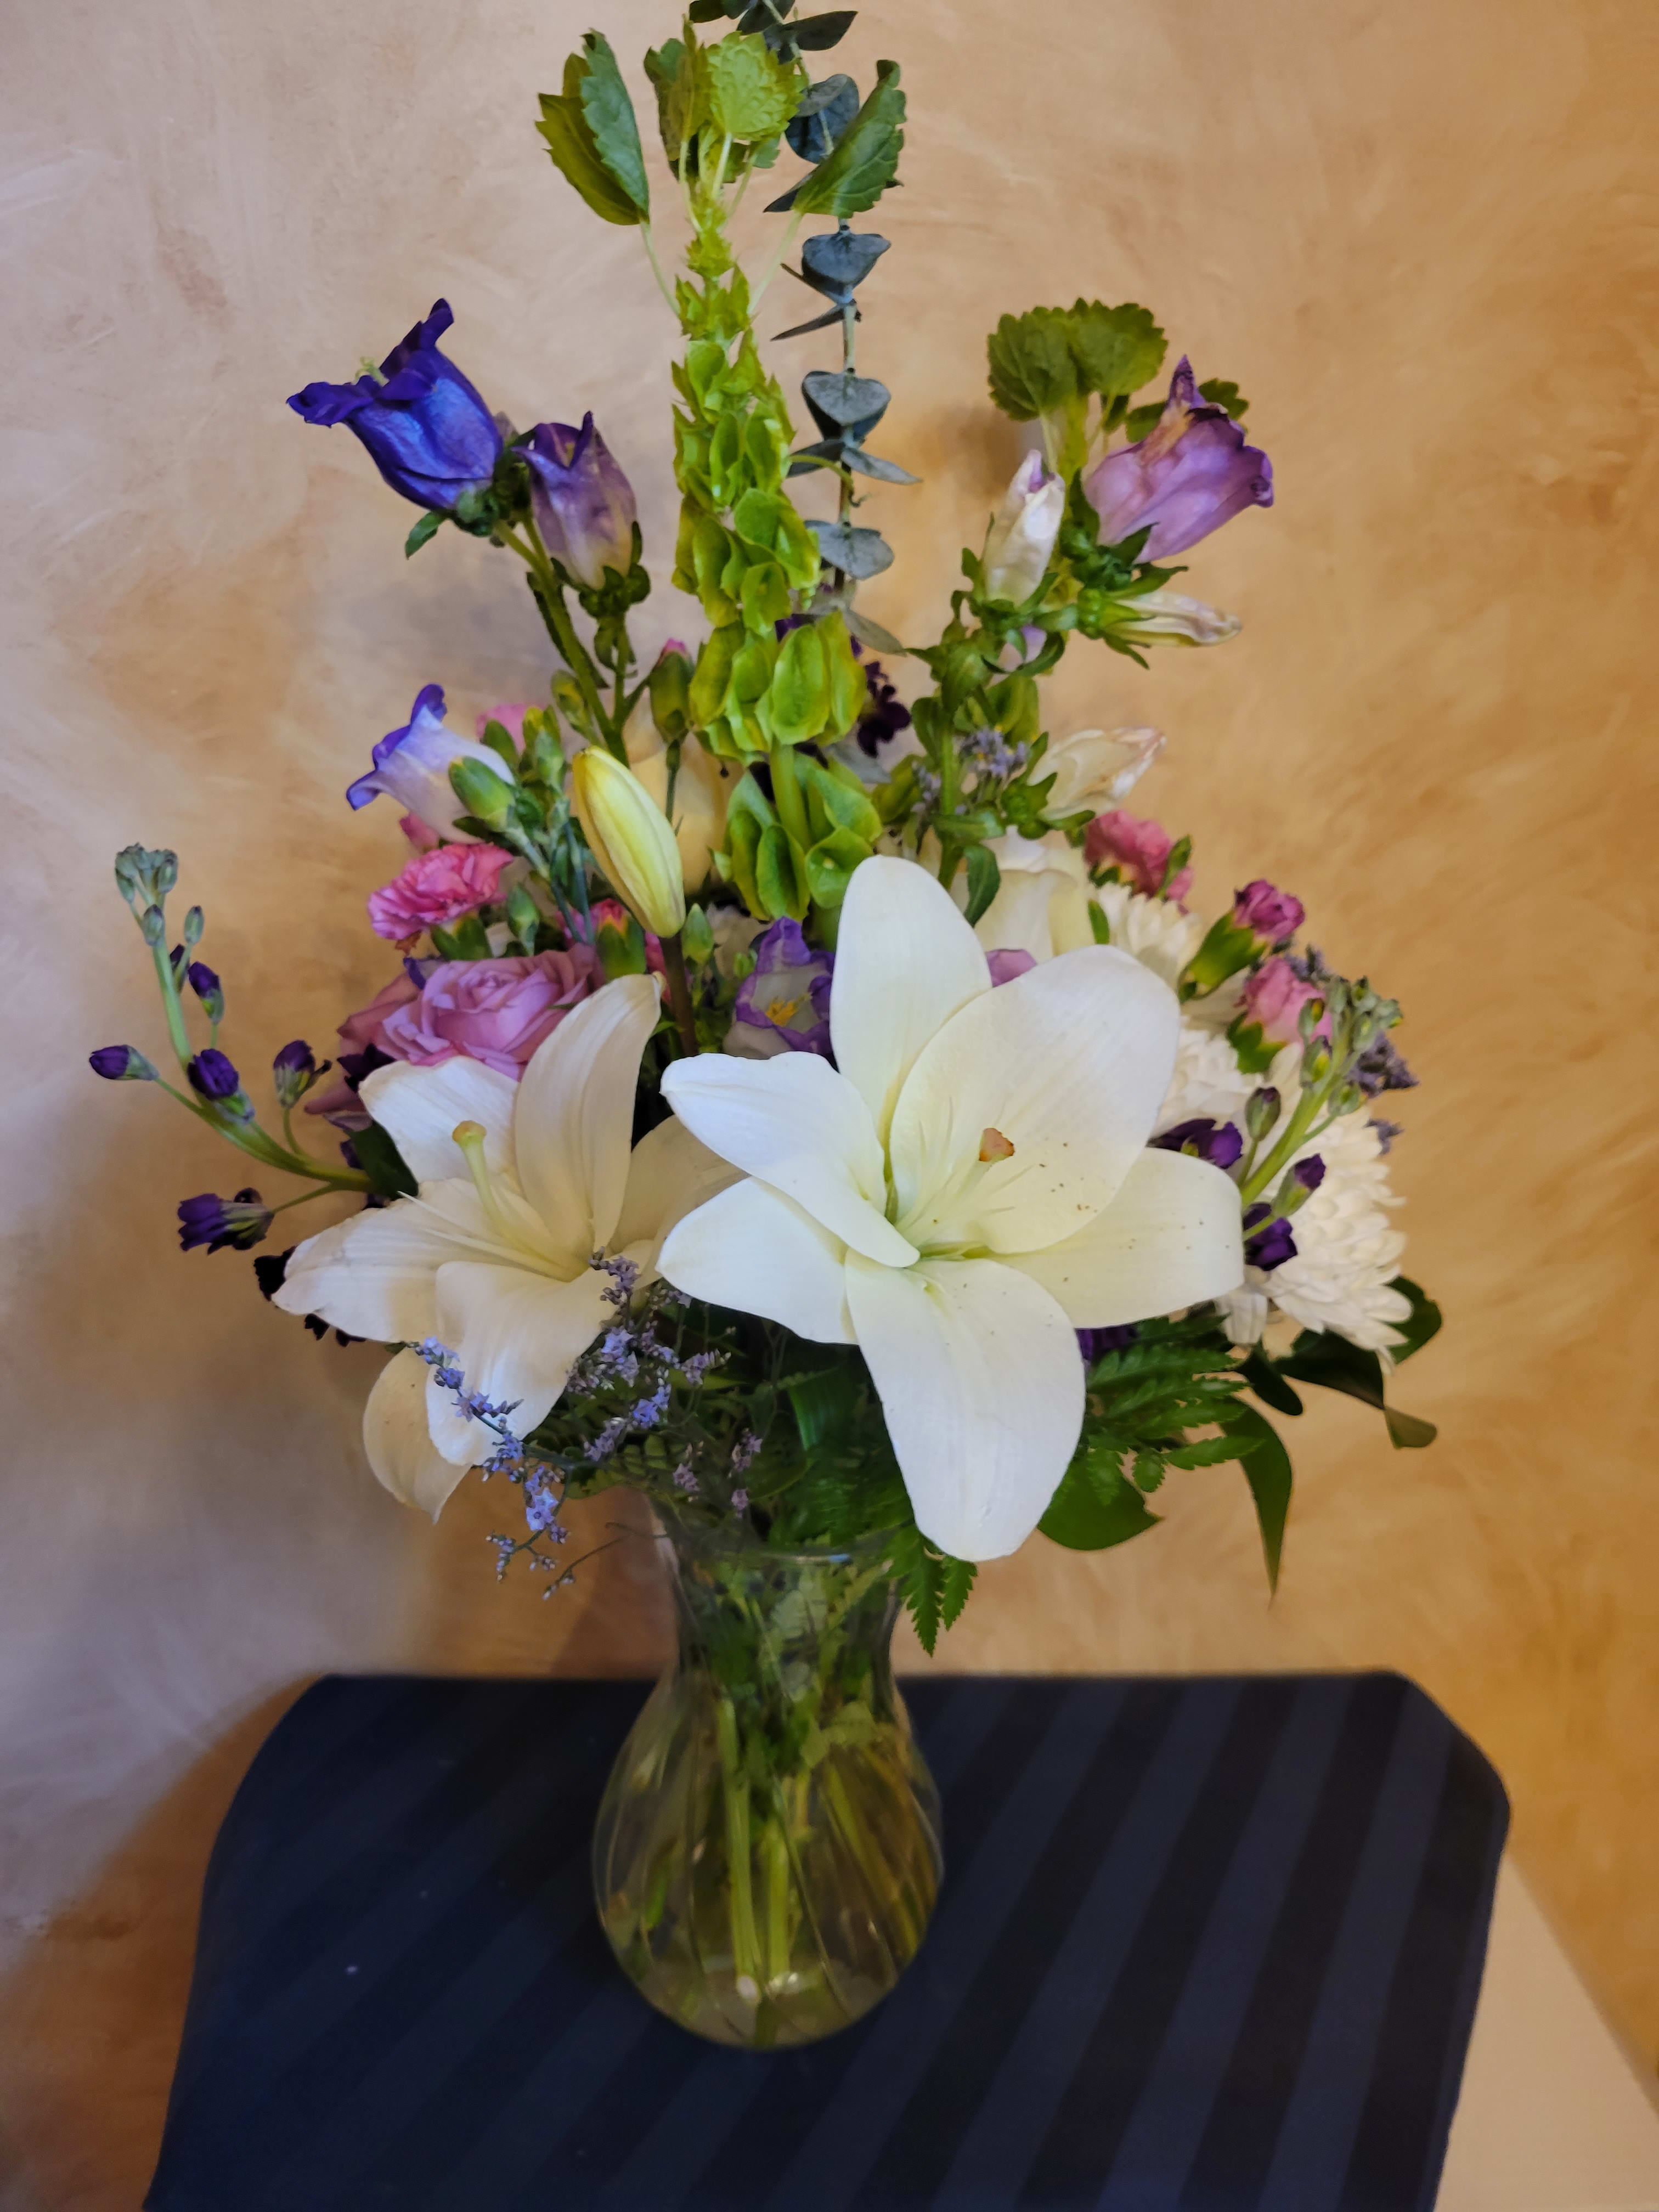 Pure Mom - Big and fragrant Star Gazer Lillies compliment the garden florals in this pretty mixed bouquet